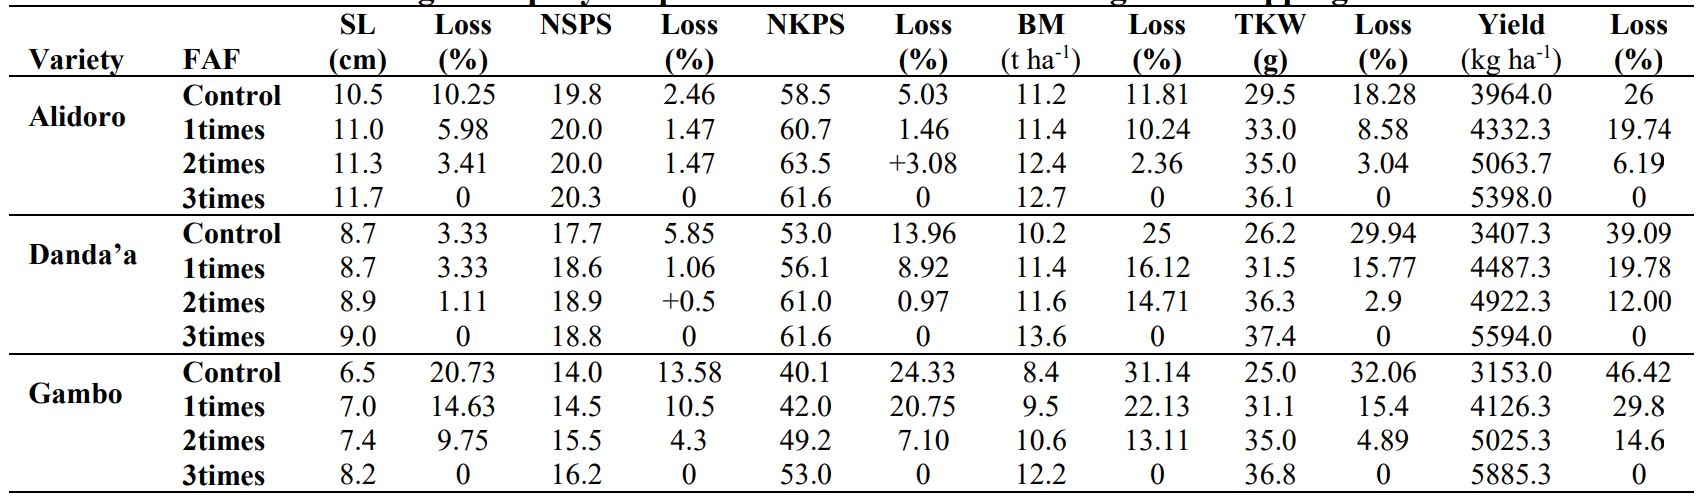 Genotypic variations in yield losses in wheat cultivars treated with different frequencies of foliar fungicide